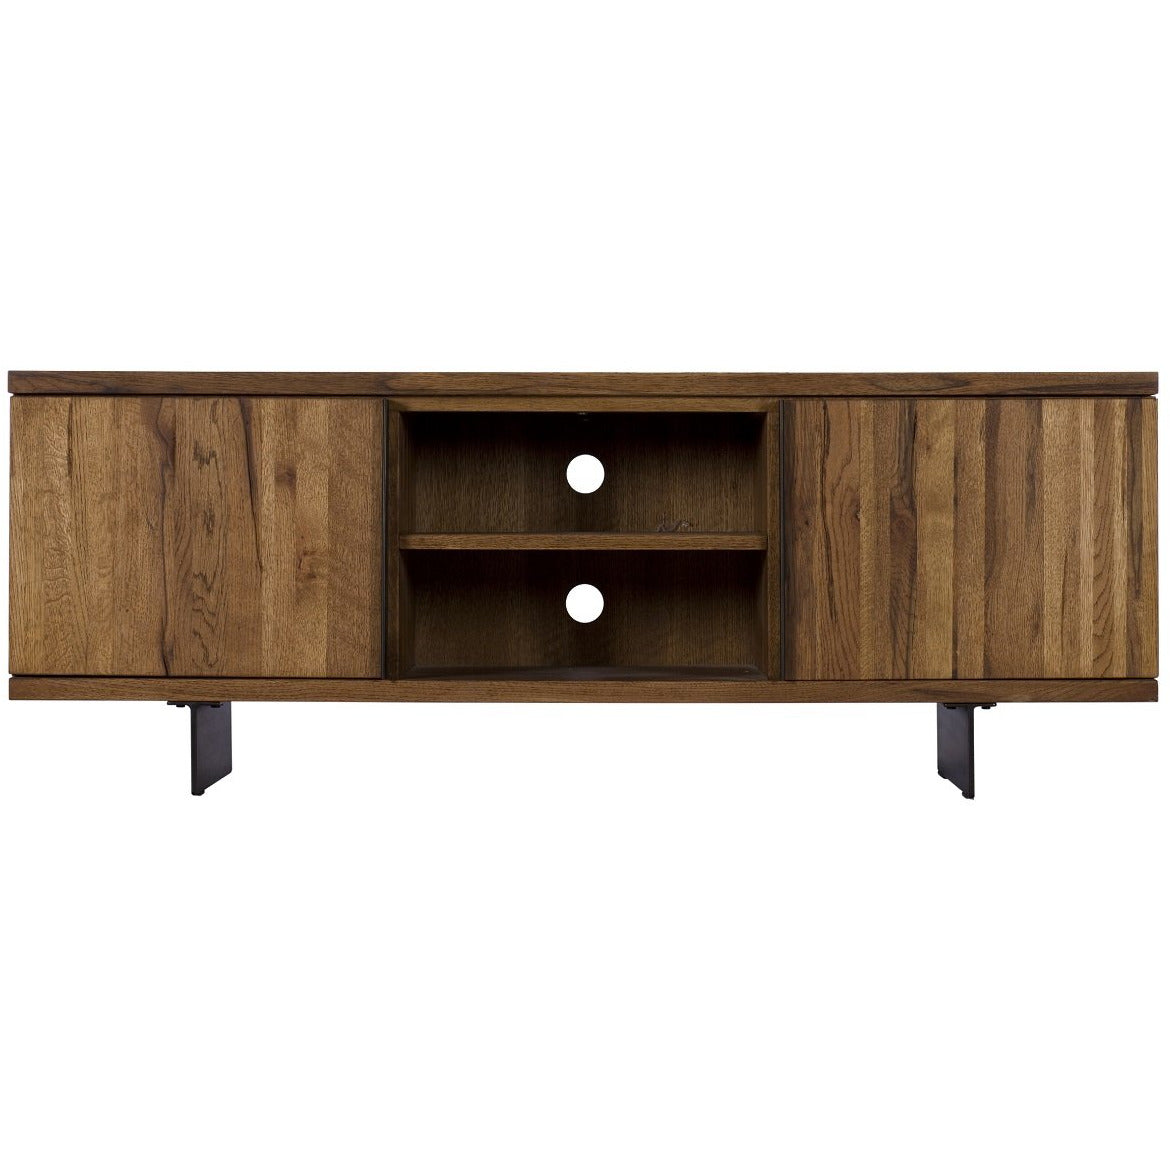 Soho Large TV Unit from Upstairs Downstairs Furniture in Lisburn, Monaghan and Enniskillen